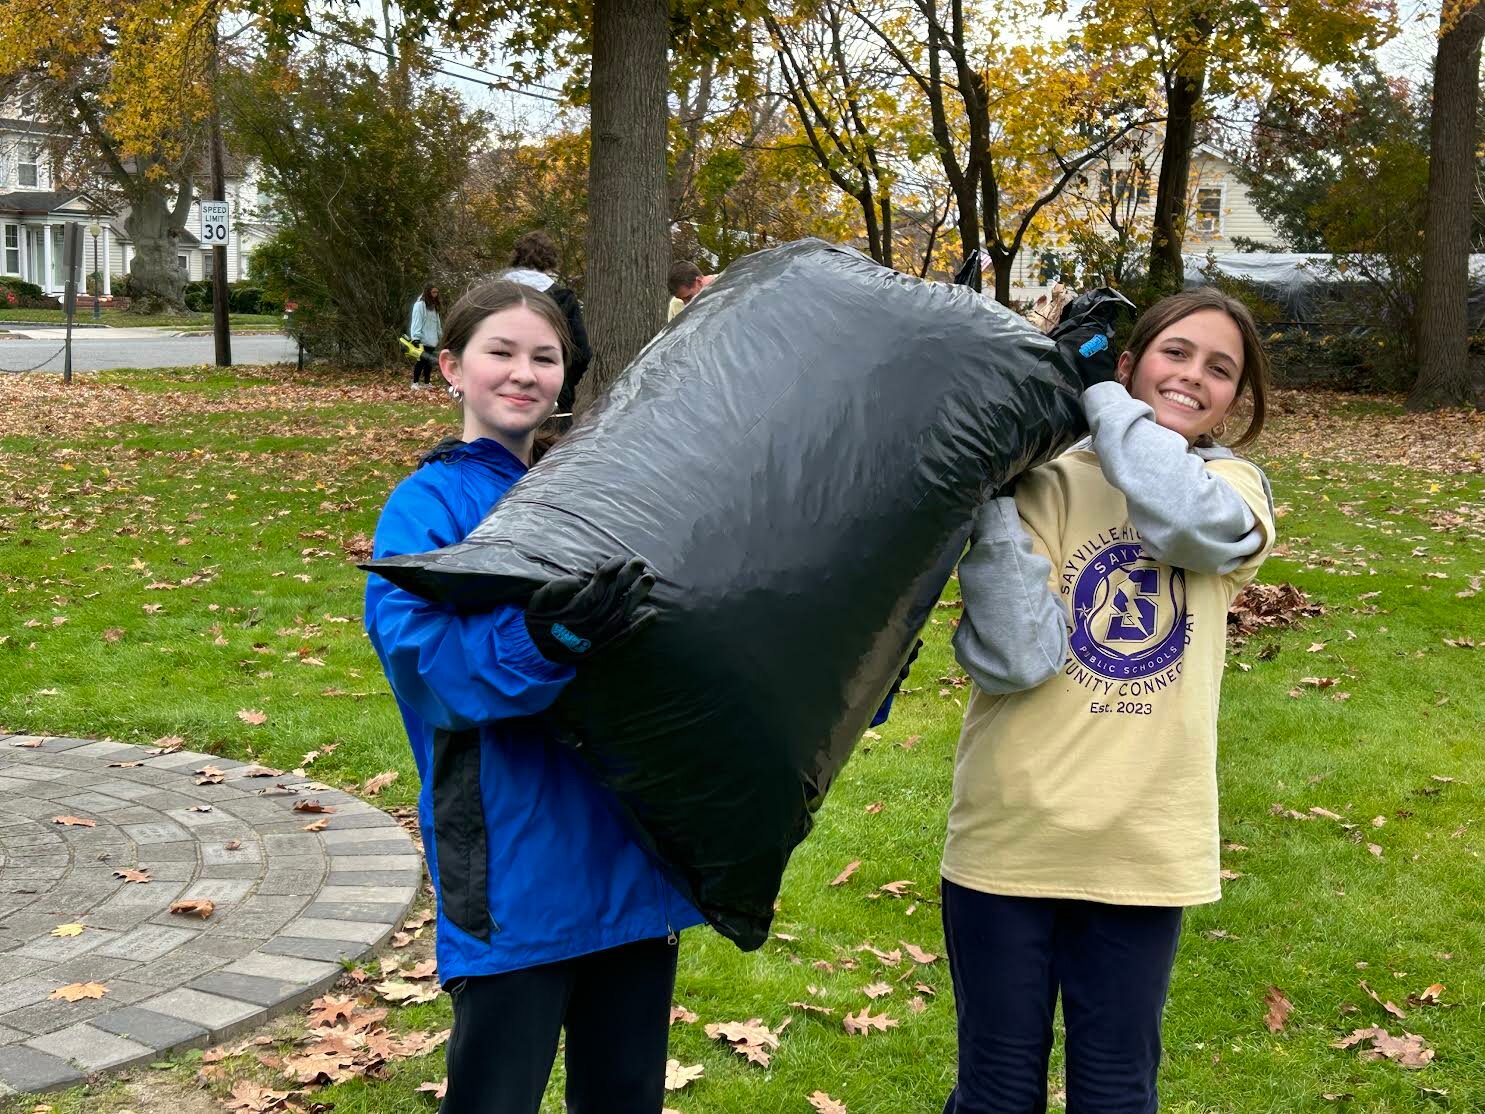 High school students participated in volunteer work throughout the Sayville and West Sayville communities.